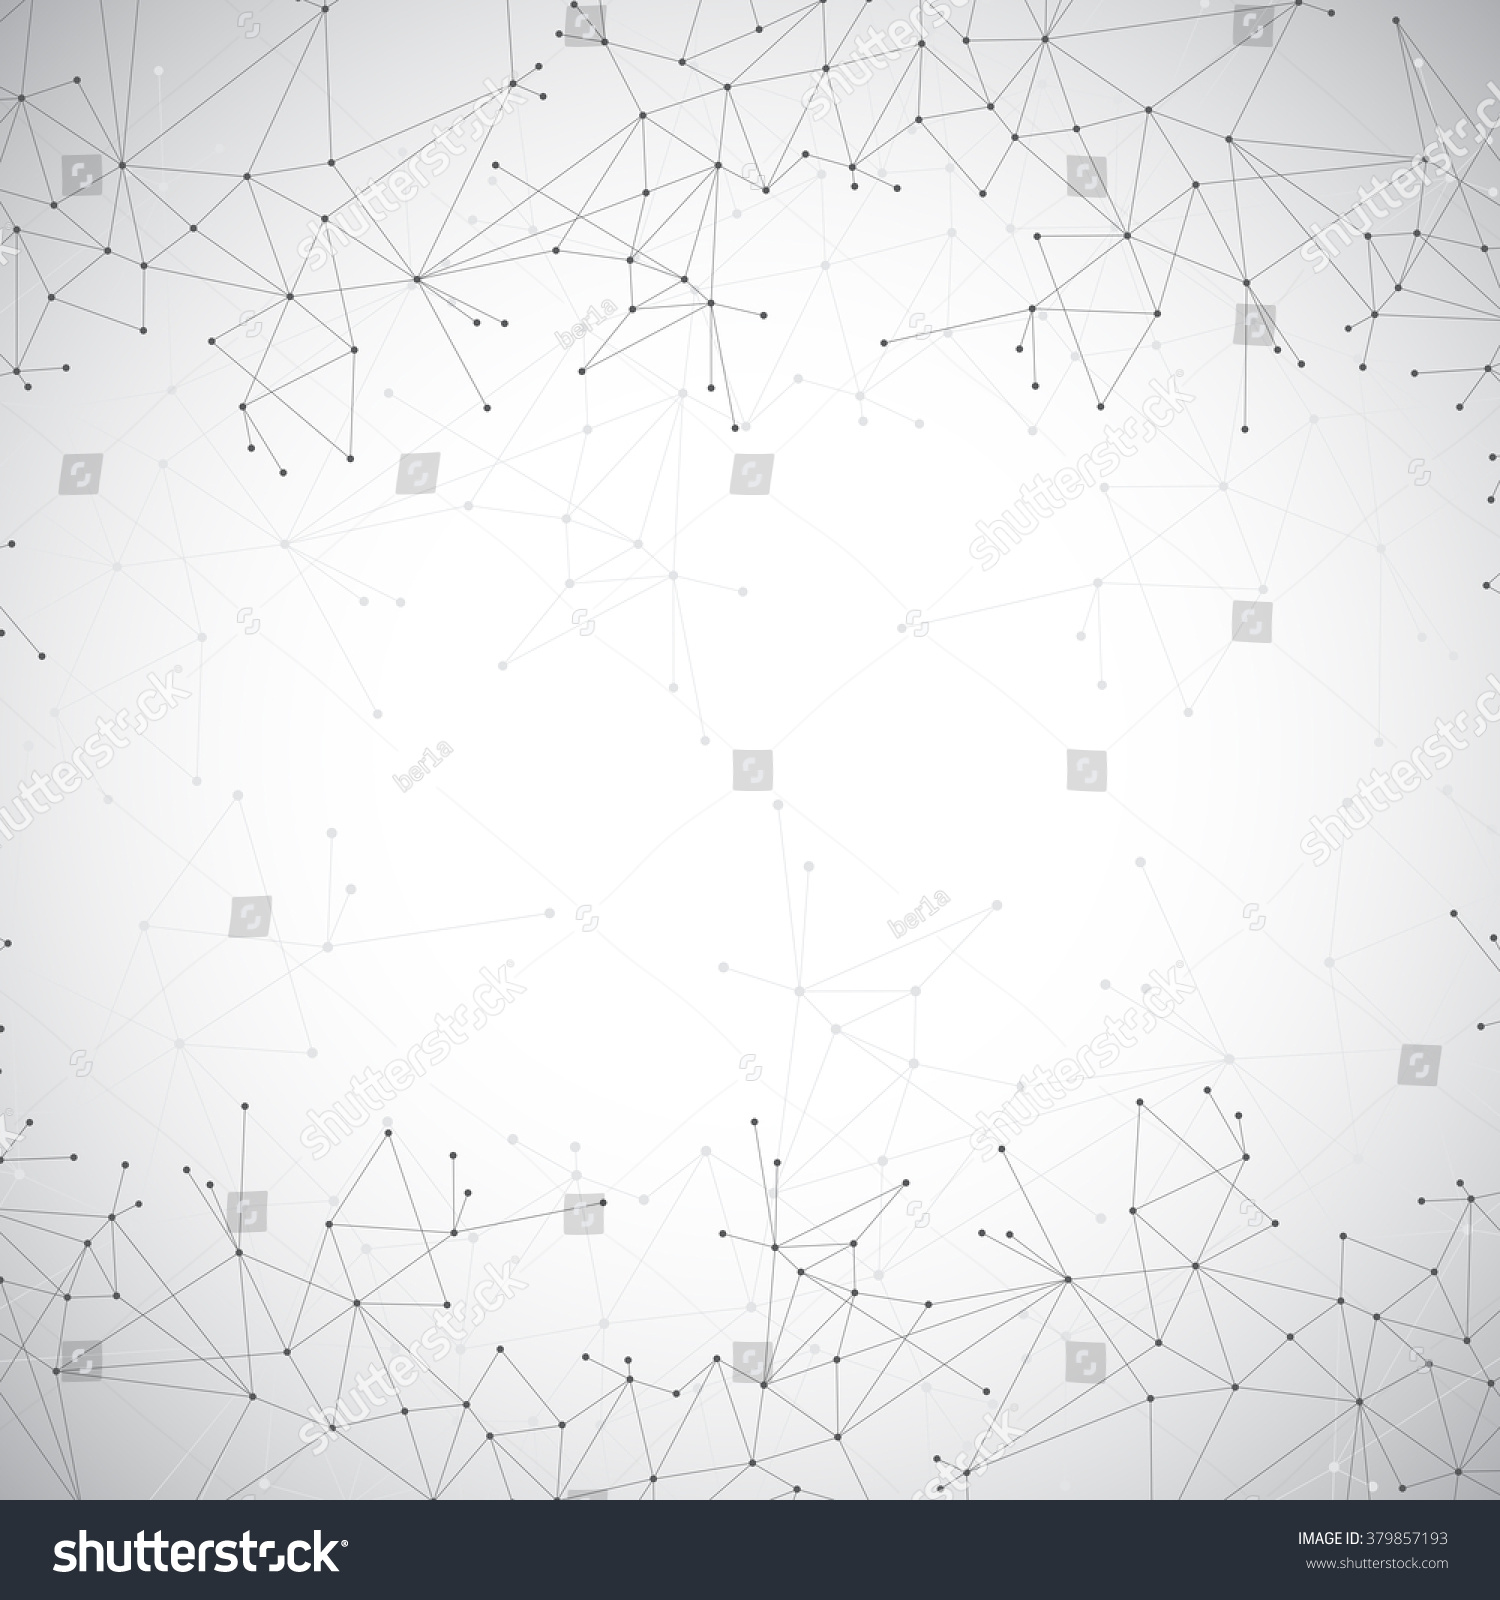 Geometric grey background molecule and communication . Connected lines with dots. Vector illustration. #379857193